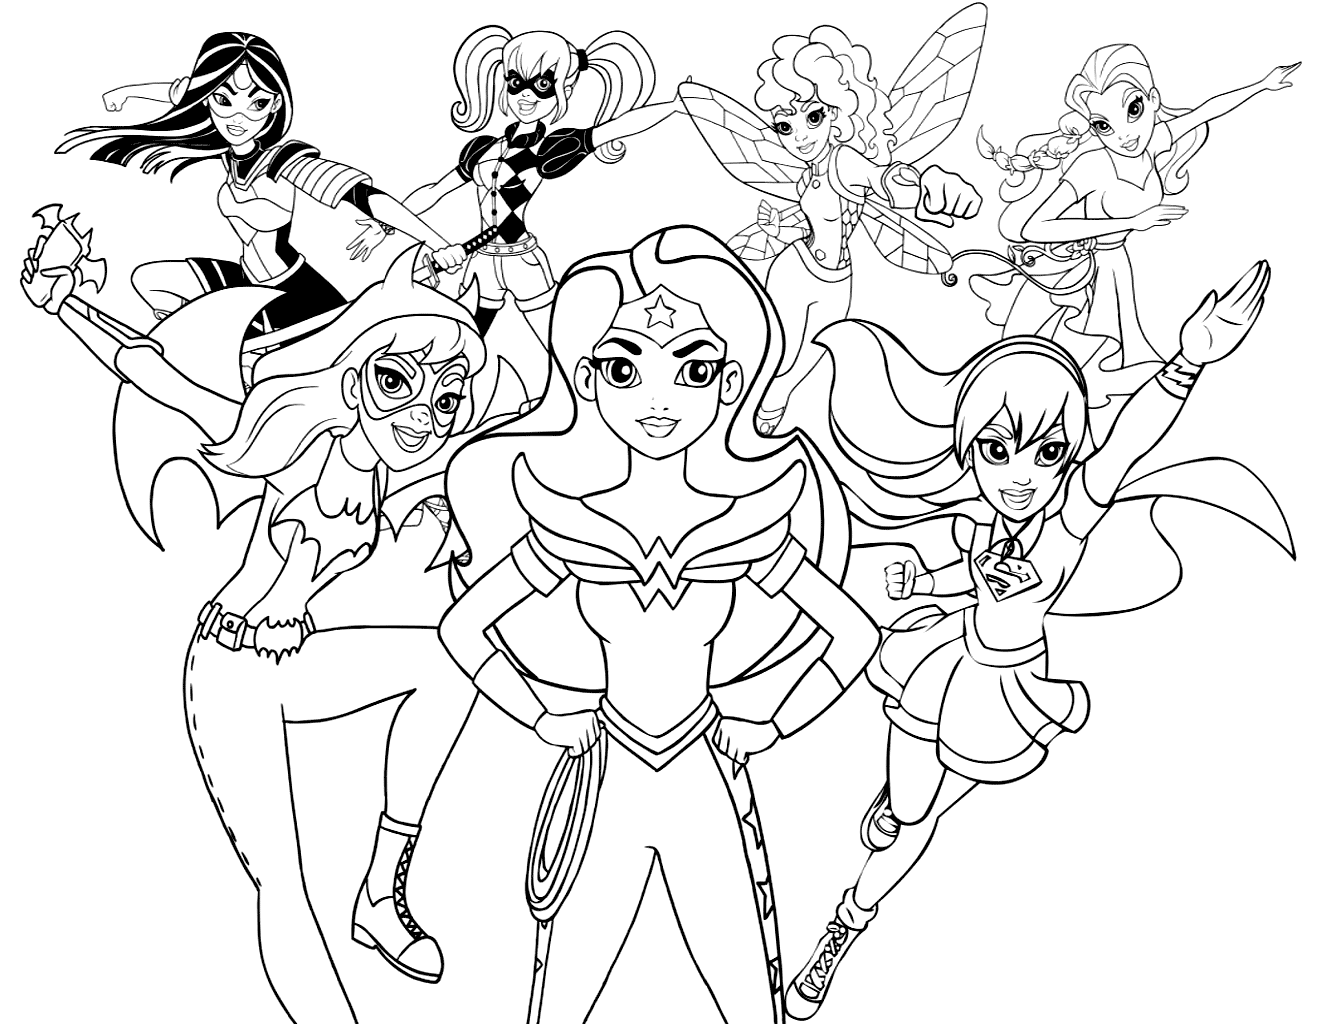 Dc Superhero Girls Characters Coloring Page – coloring.rocks!